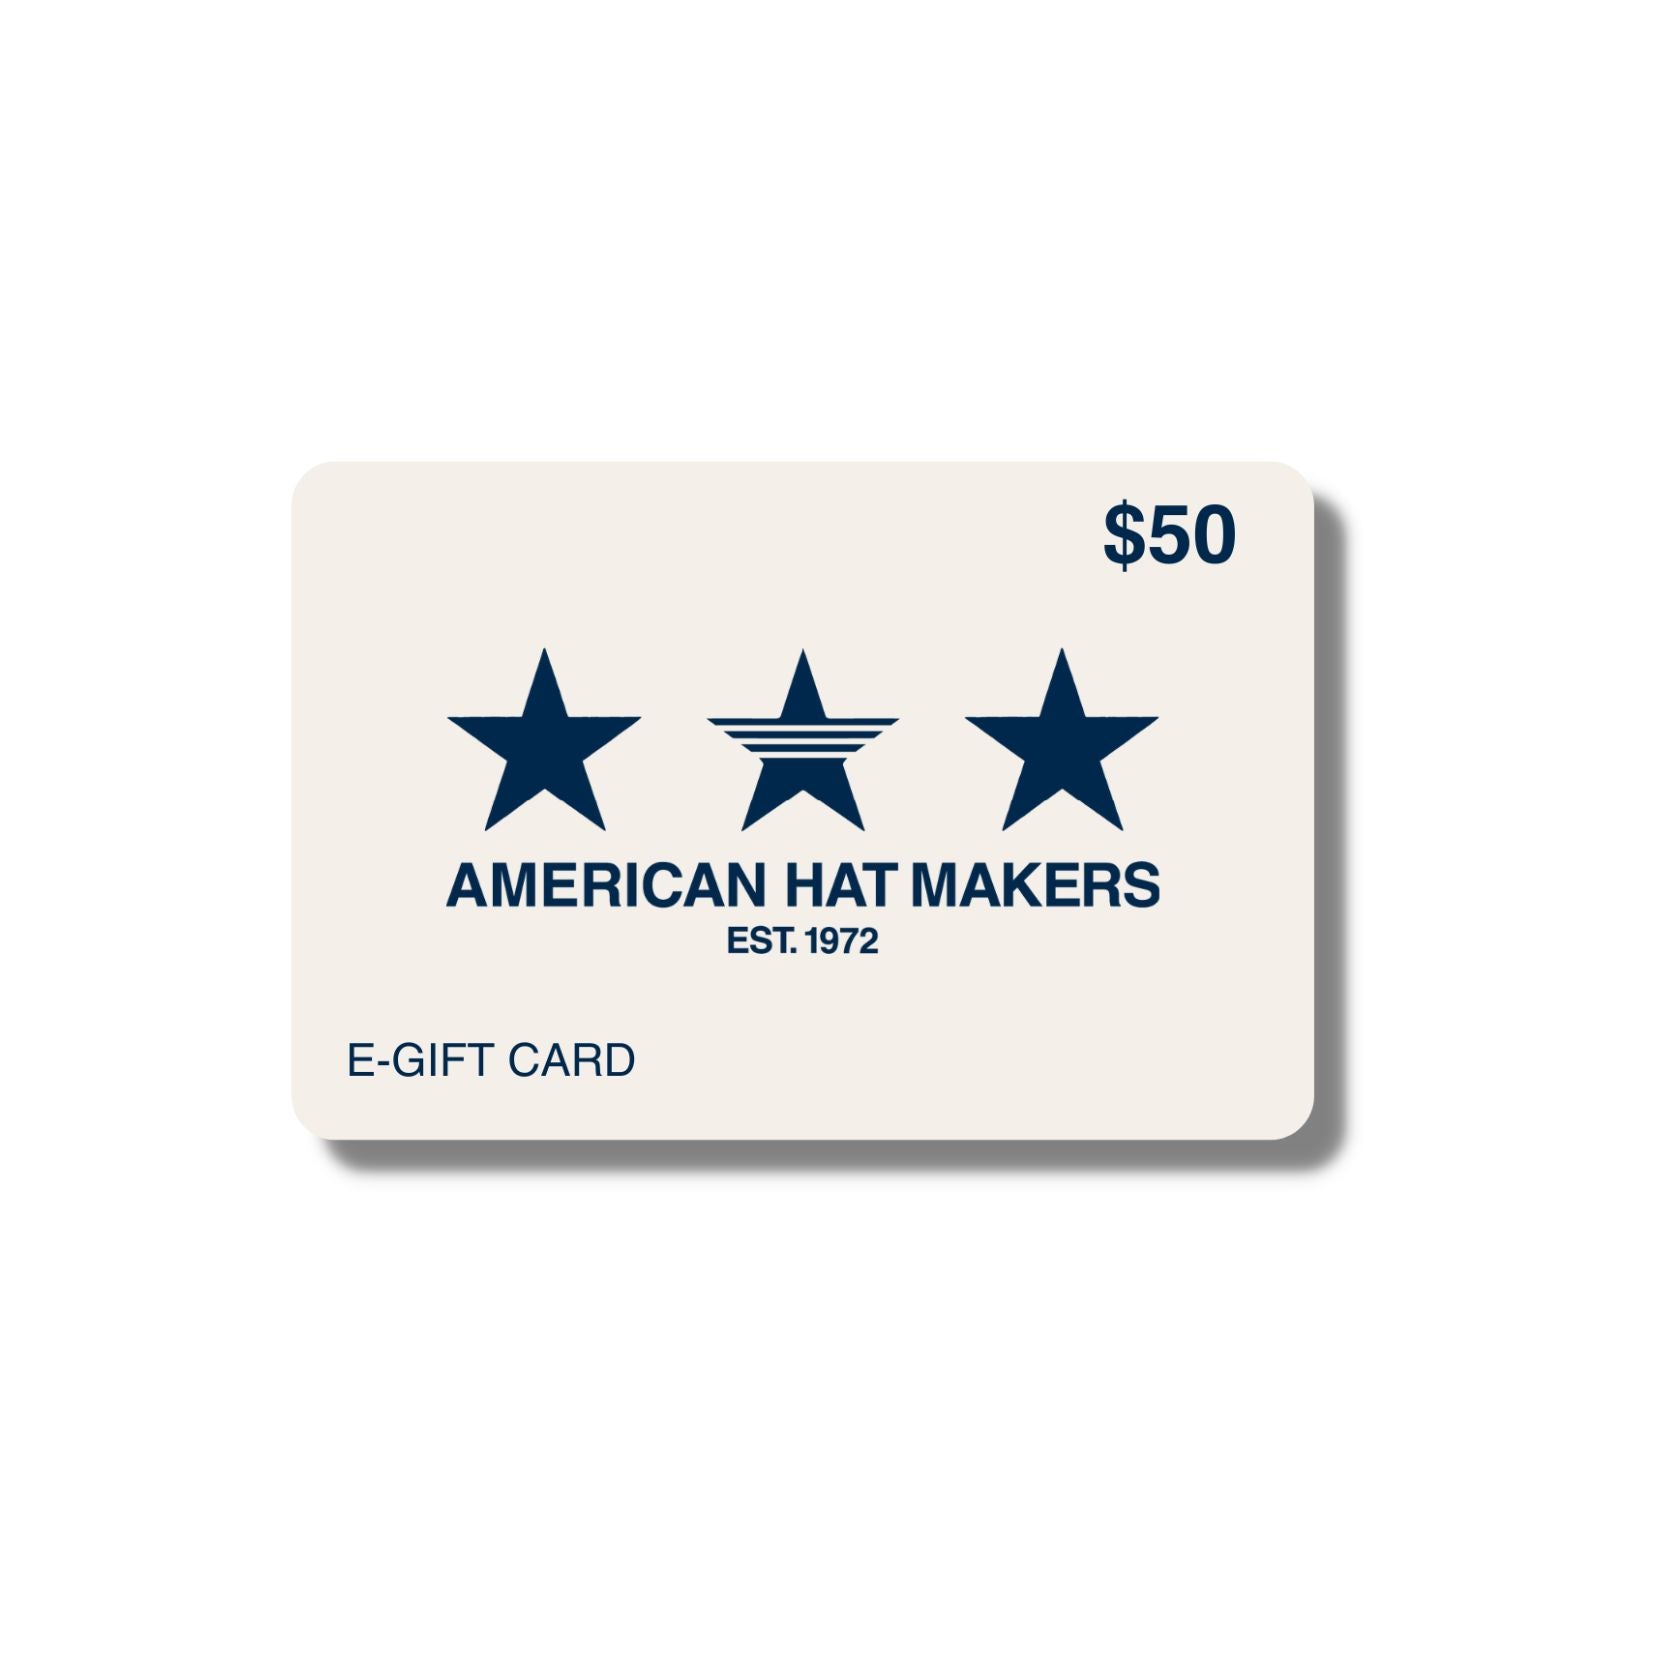 $50 American Hat Makers E-Gift Card